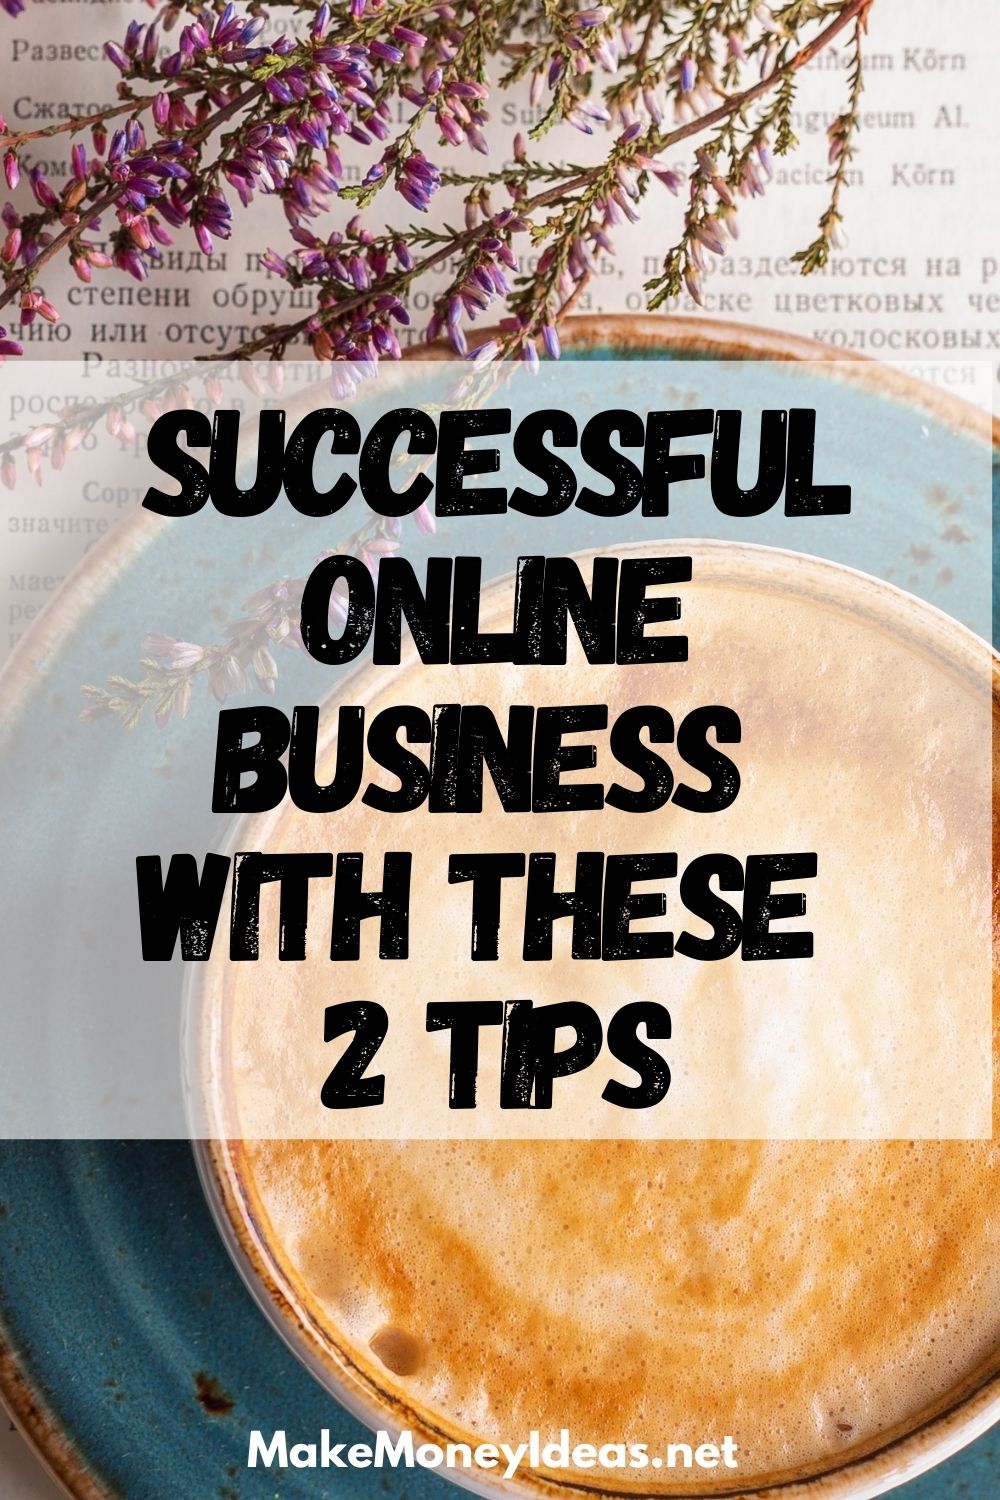 Successful online business with these 2 tips